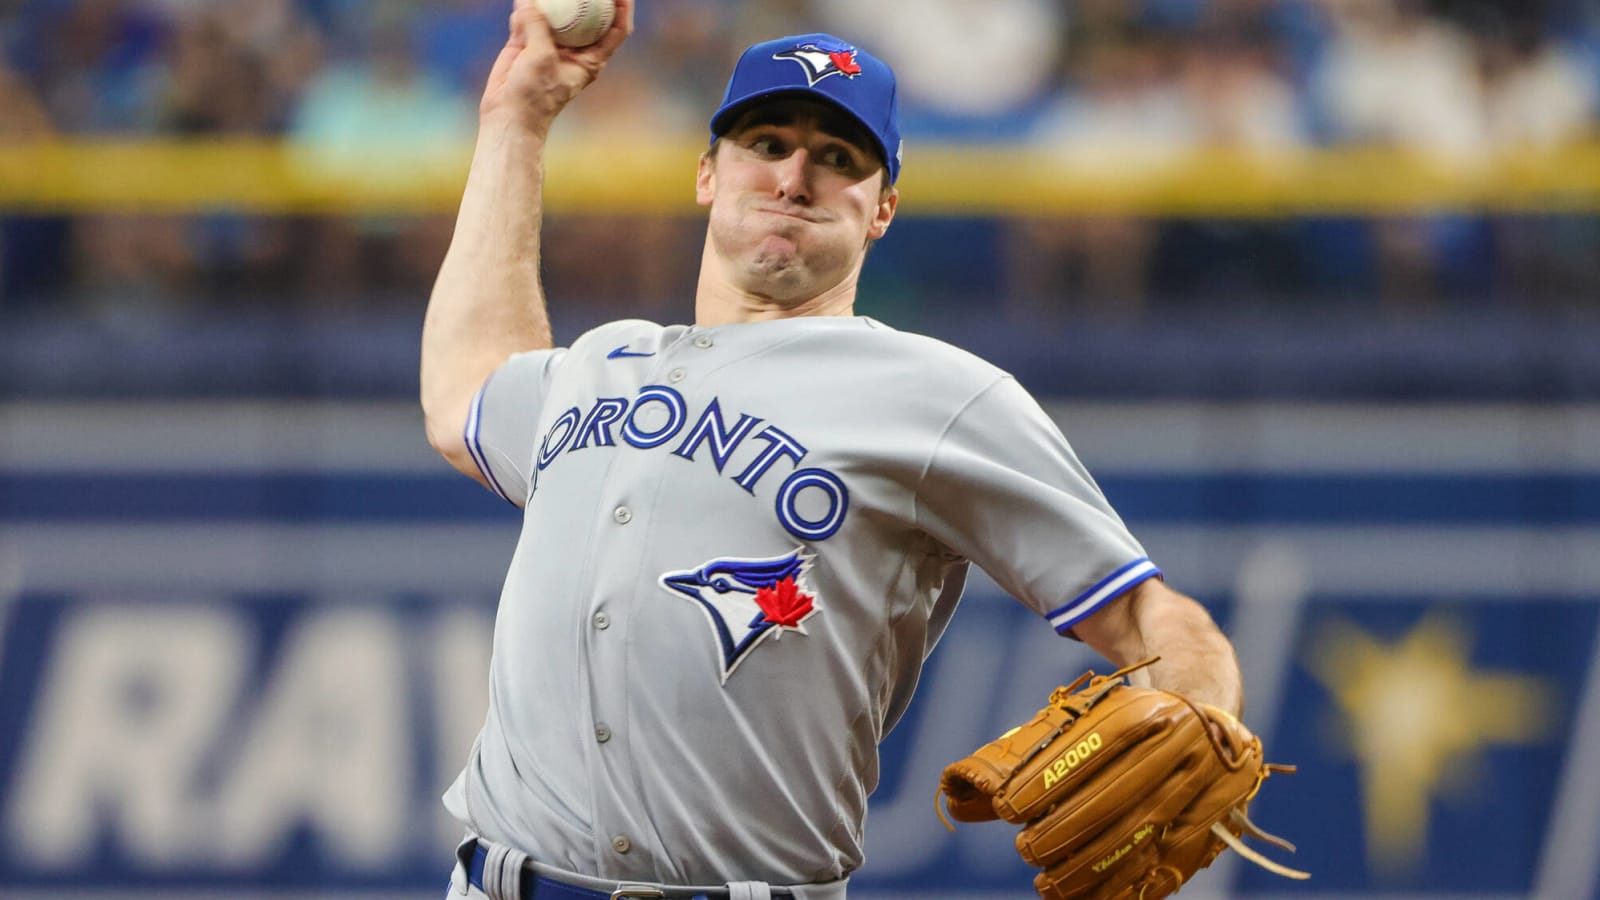 Giants sign RHP Ross Stripling to two-year, $25M deal